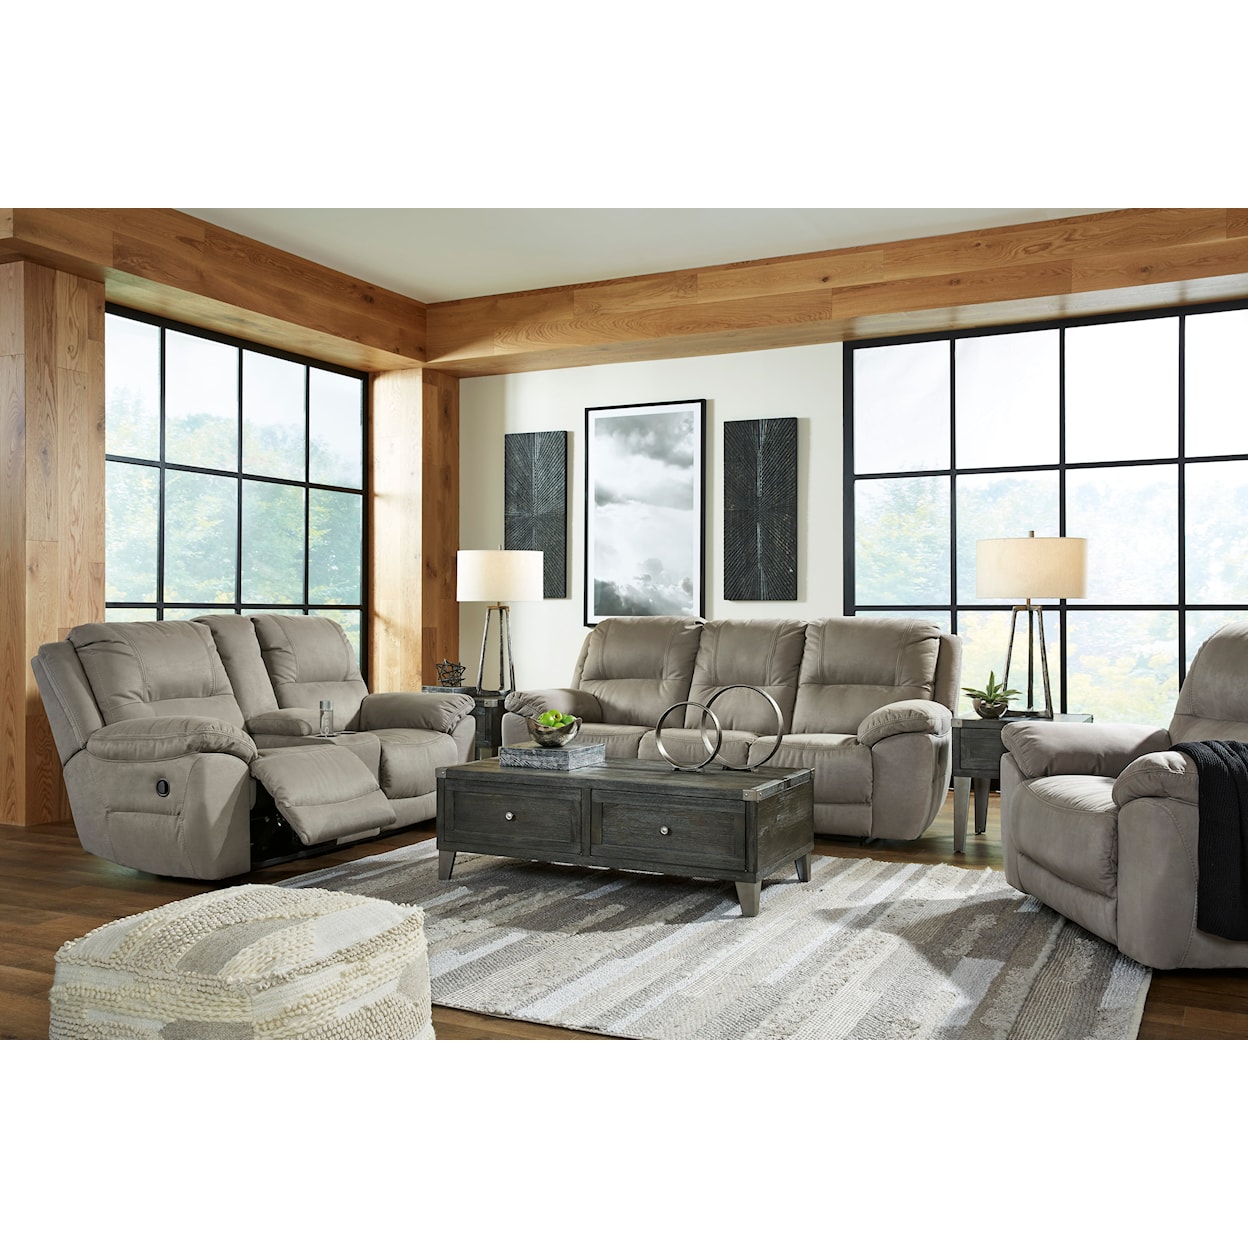 Signature Design by Ashley Furniture Next-Gen Gaucho Reclining Loveseat with Console